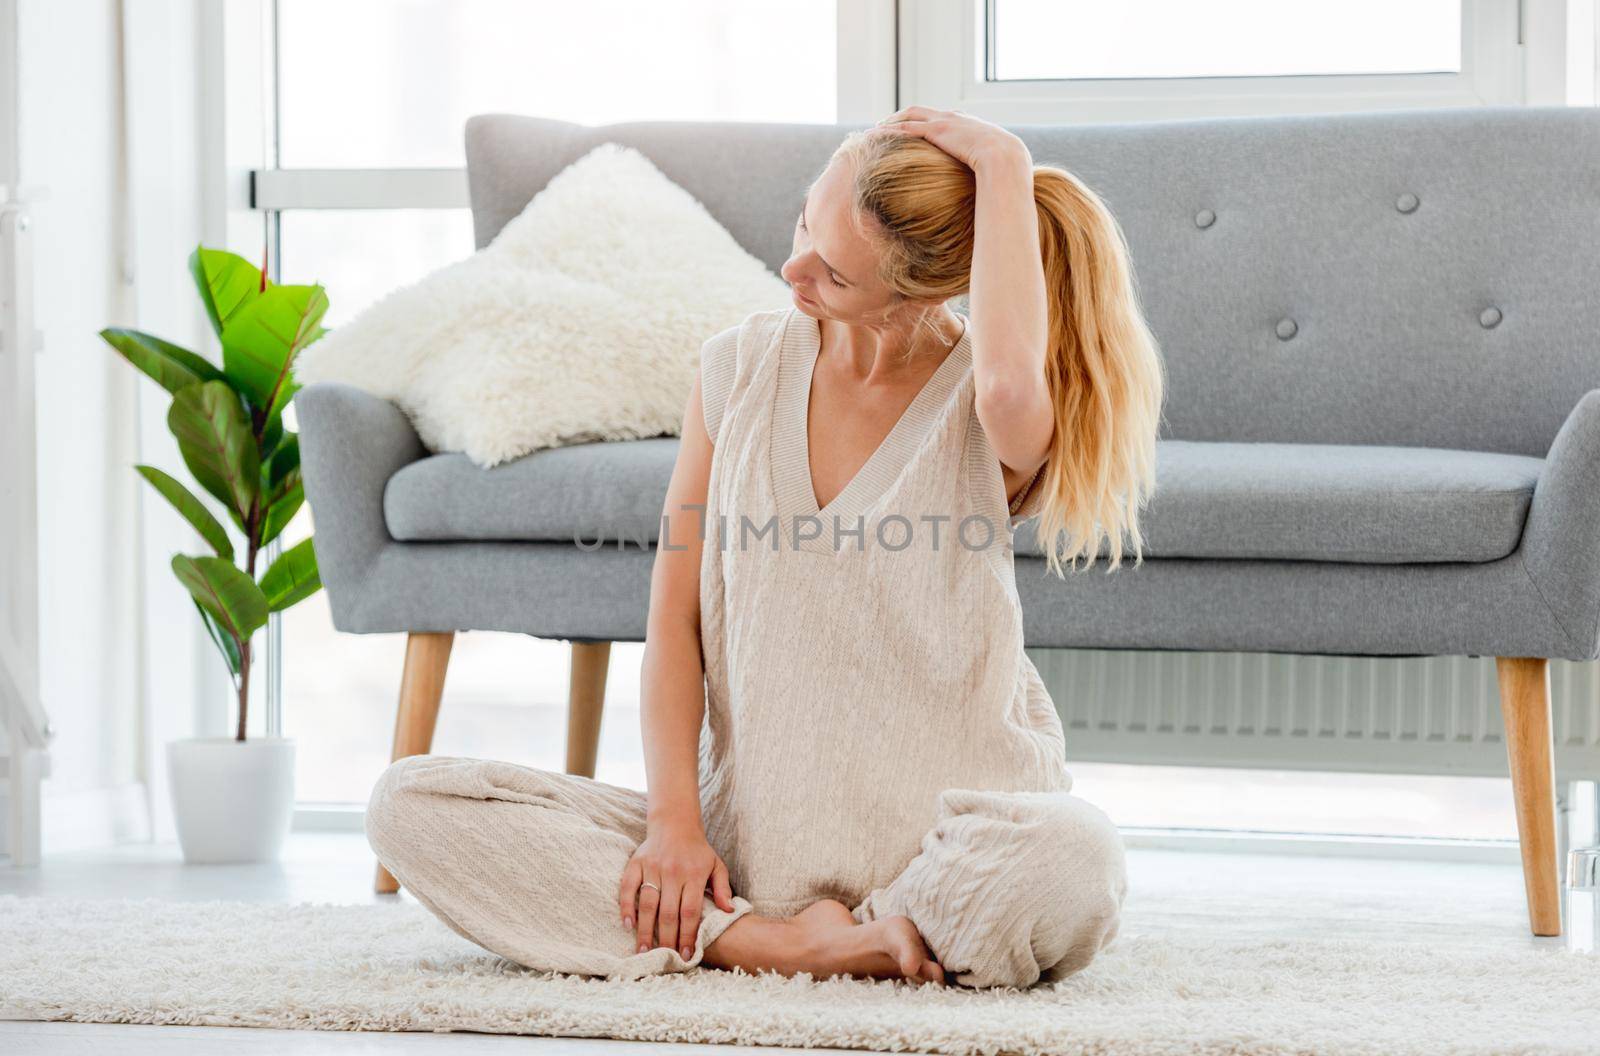 Blond girl home yoga workout by tan4ikk1